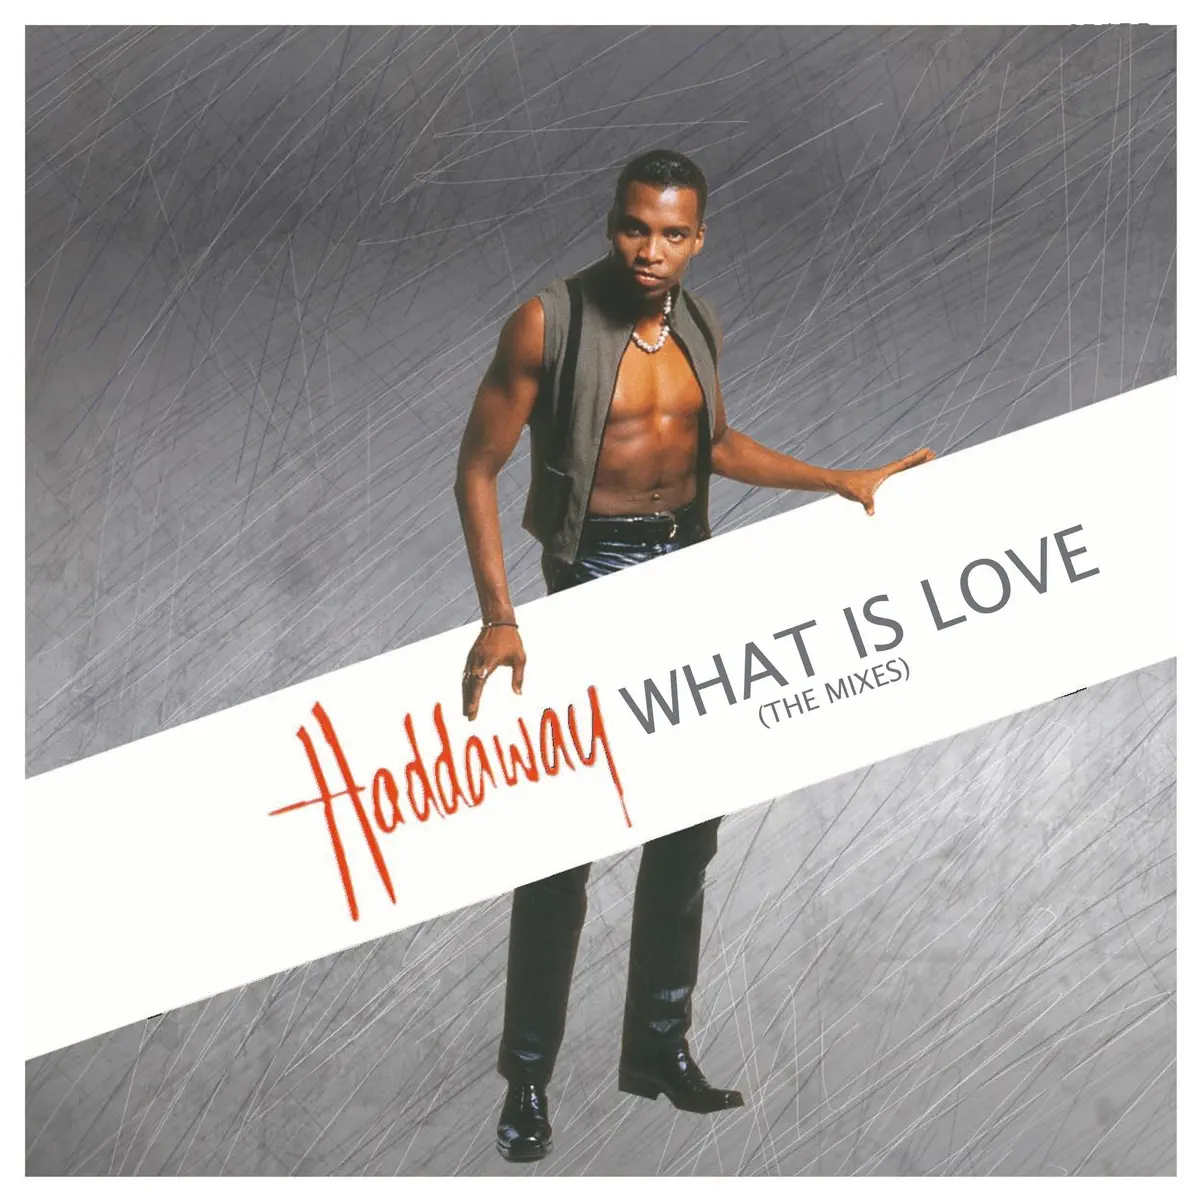 Haddaway - What Is Love (The Mixes) (2013) [iTunes Plus AAC M4A]-新房子